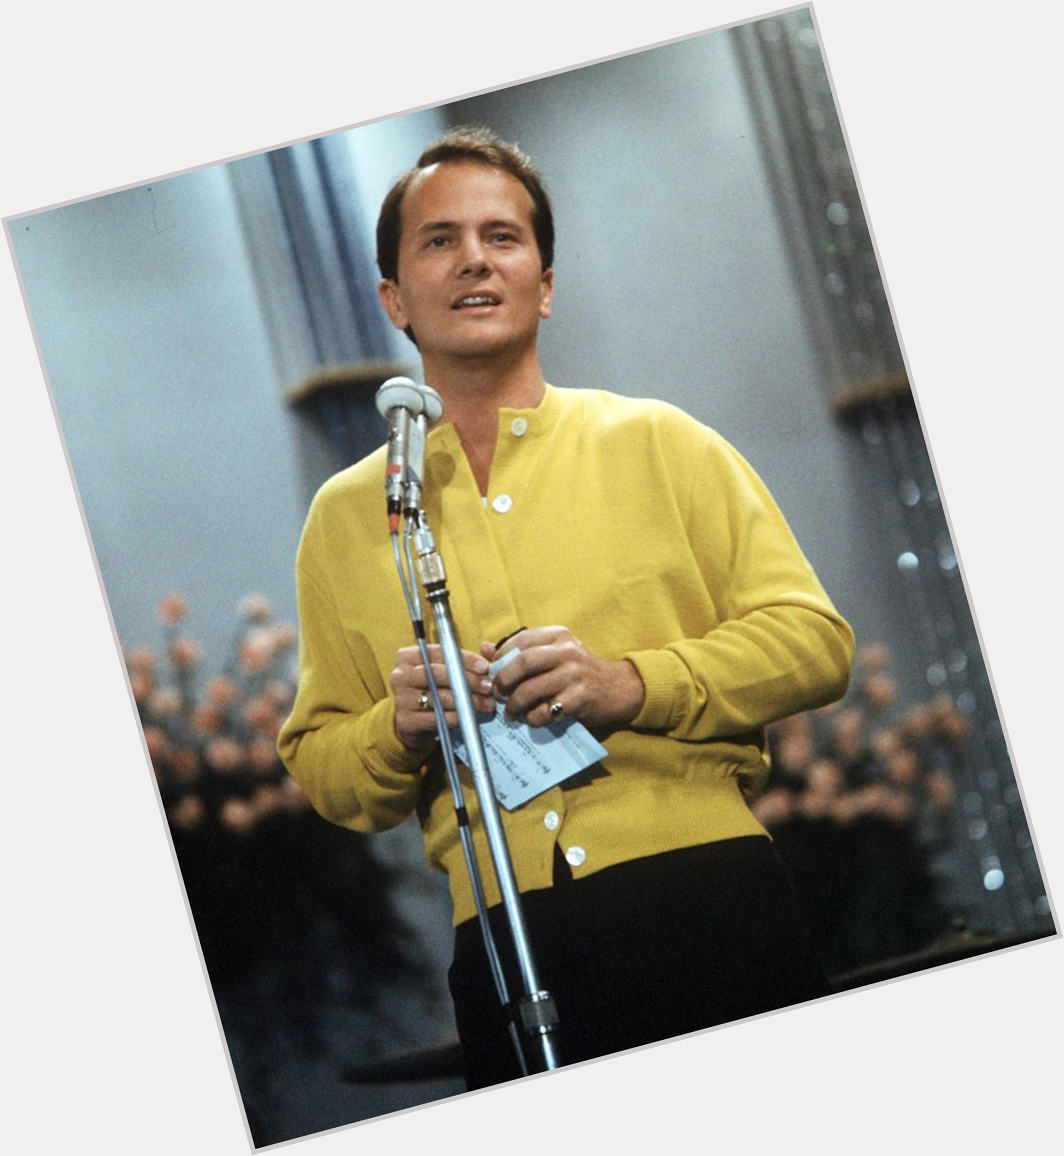 We\re wishing a Happy & Healthy 86th Birthday to legendary singer, Pat Boone! 